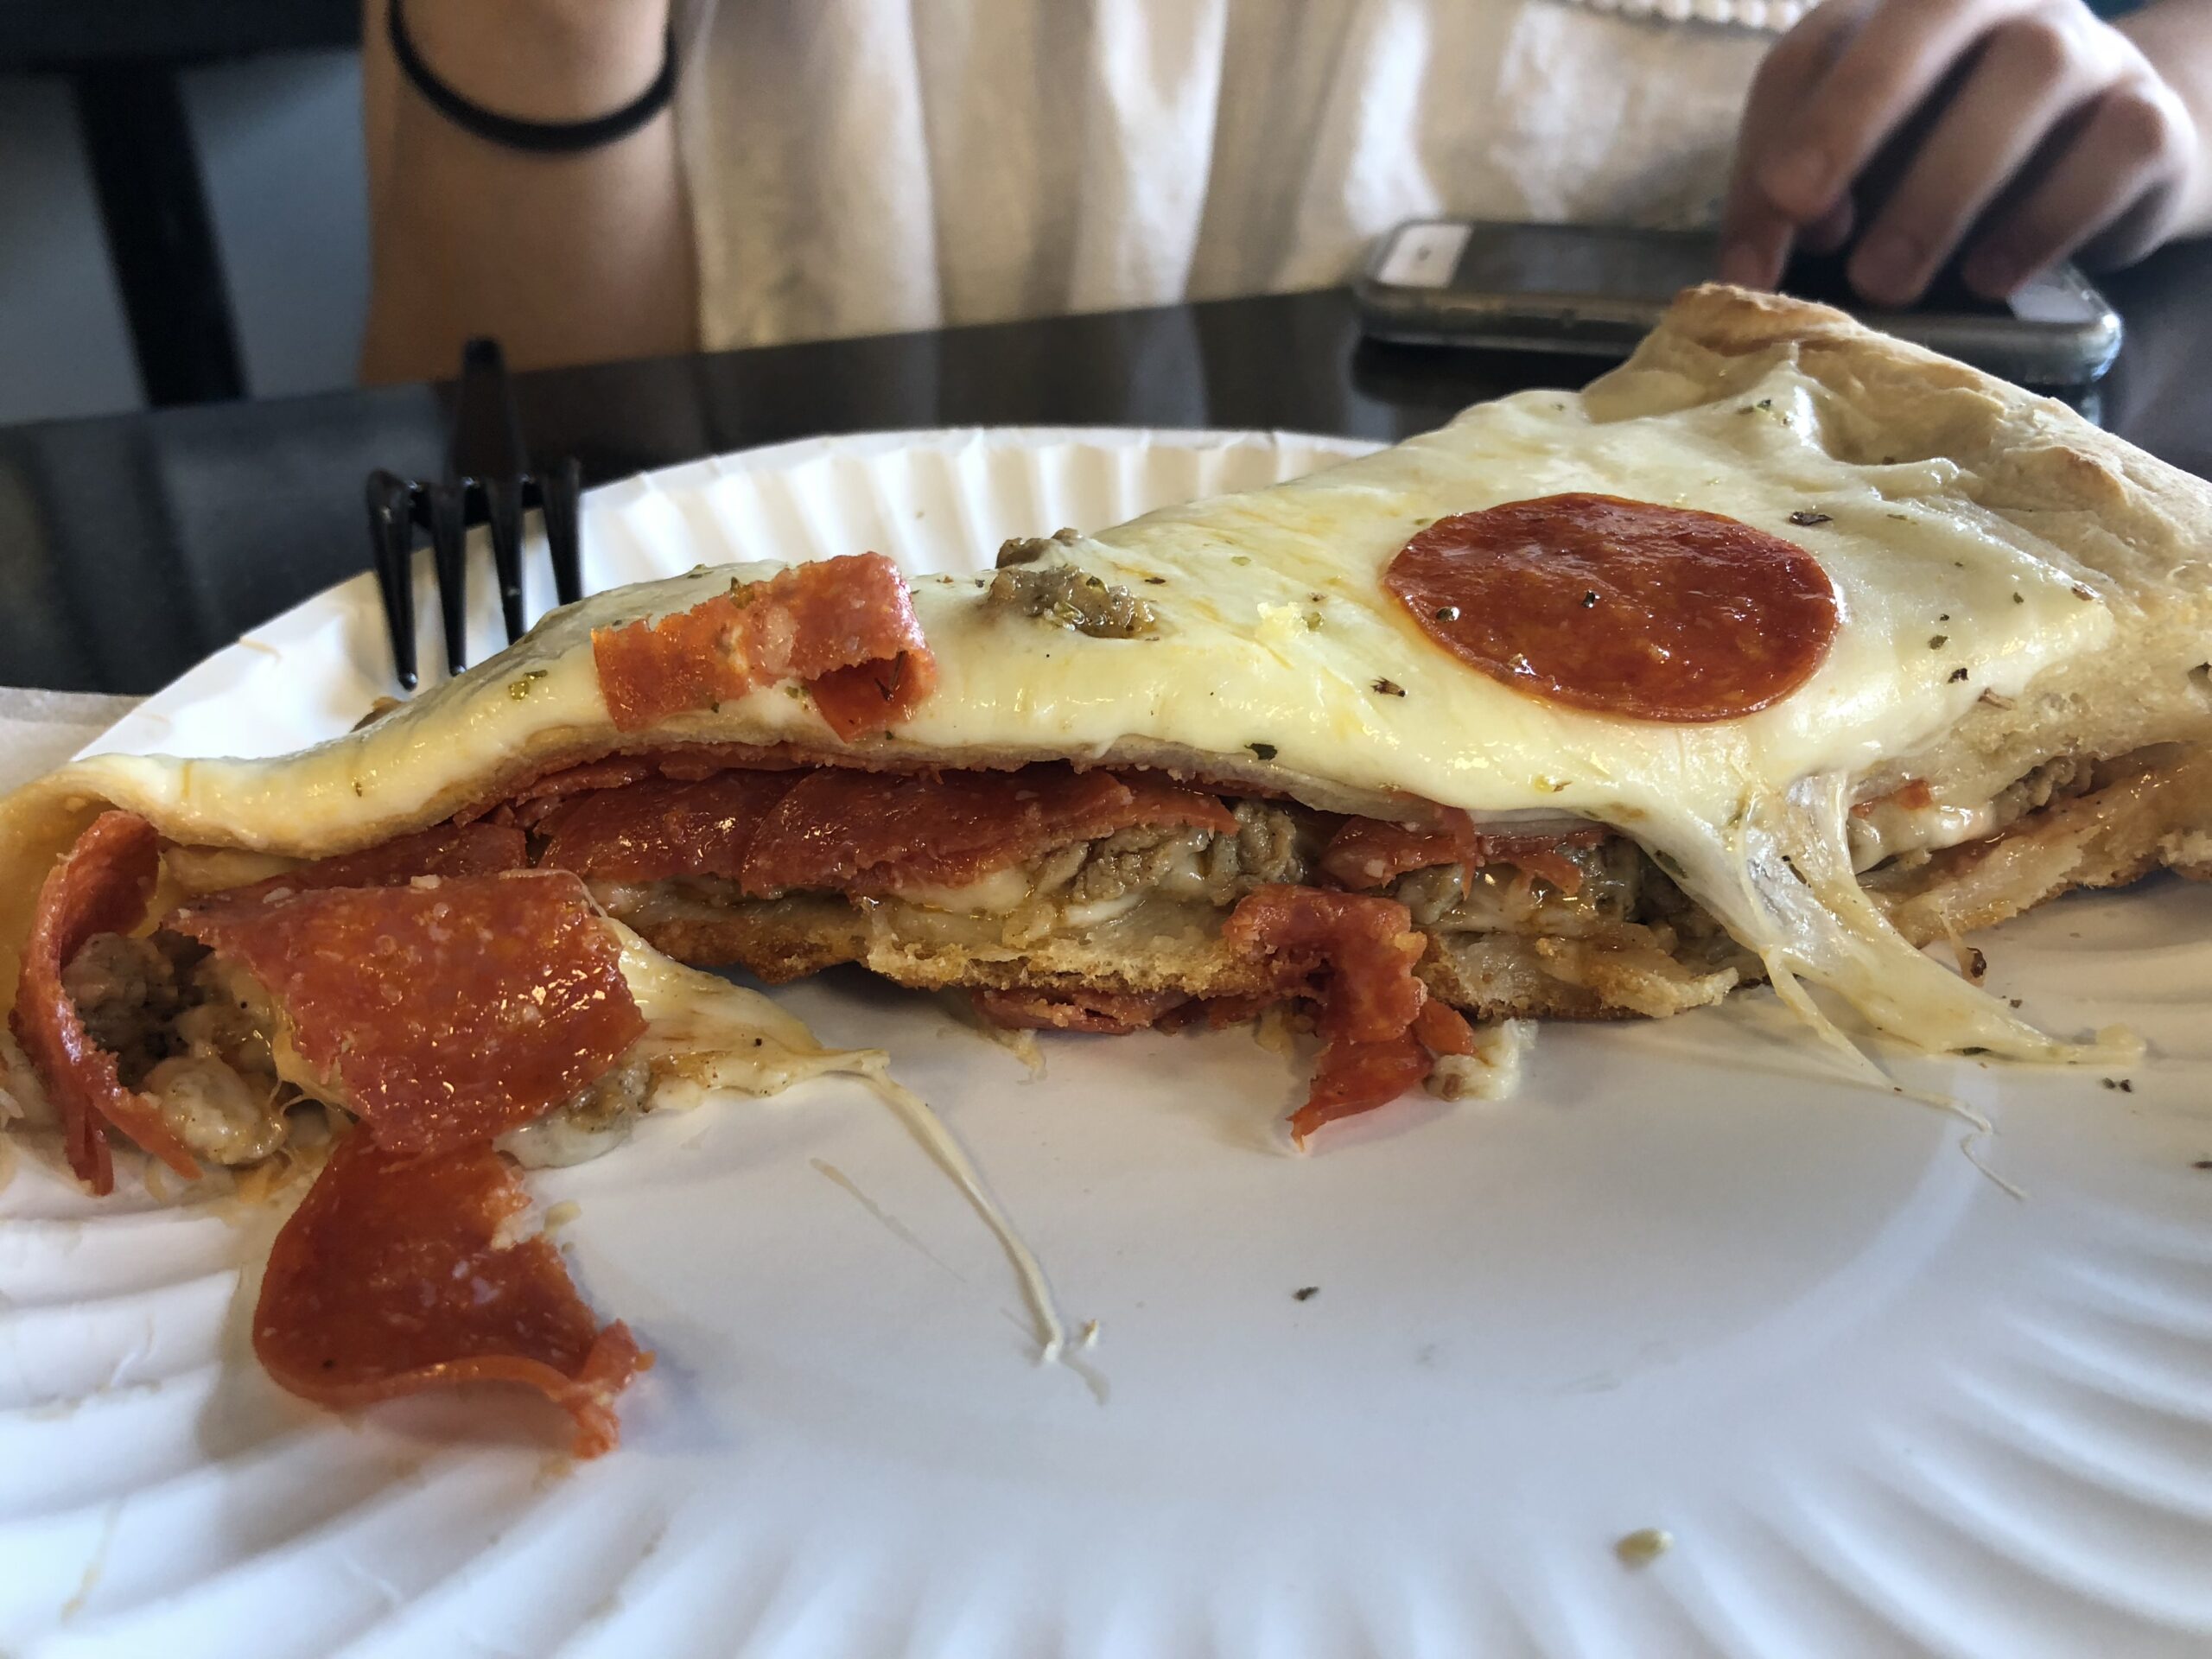 The best local restaurants in Nashville, TN - The Gladiator at joey's house of pizza 